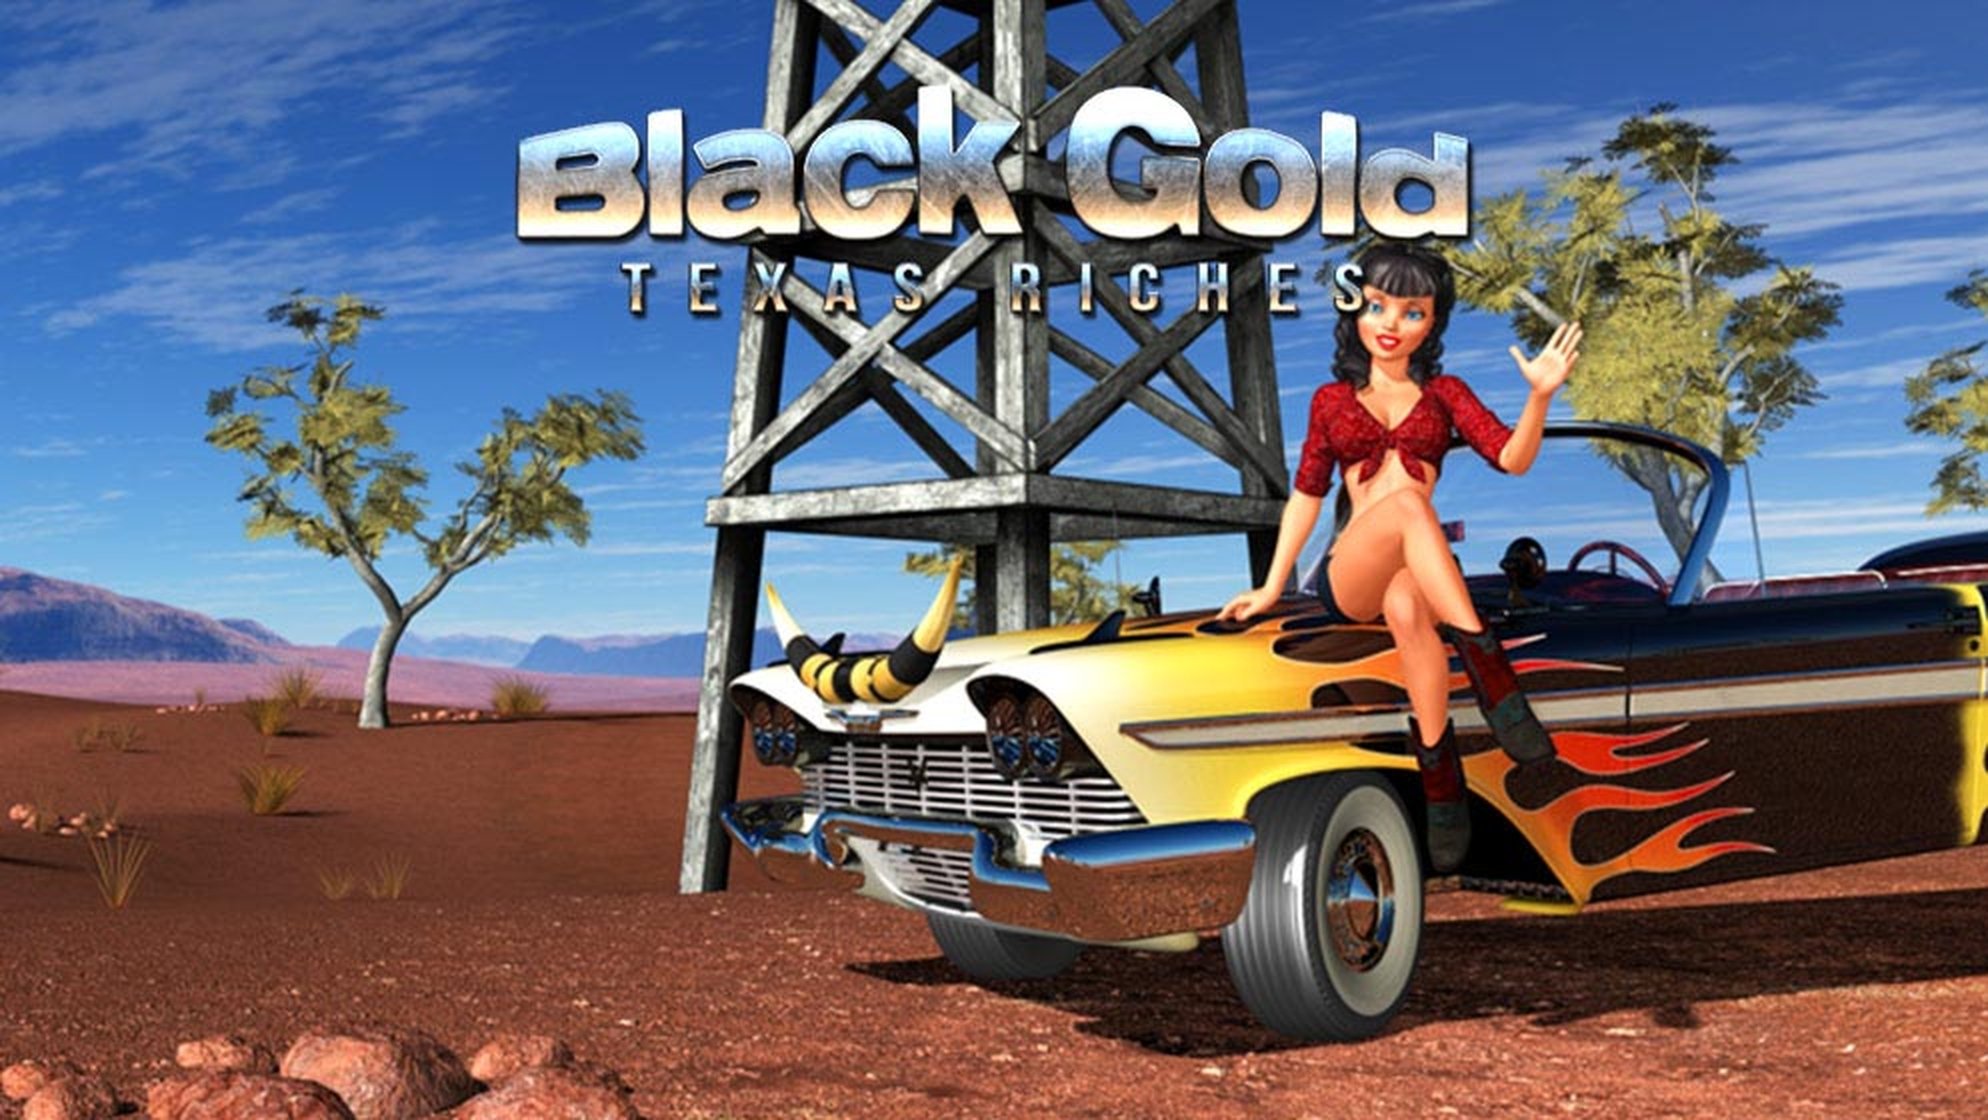 The Black Gold Texas Riches Online Slot Demo Game by Capecod Gaming